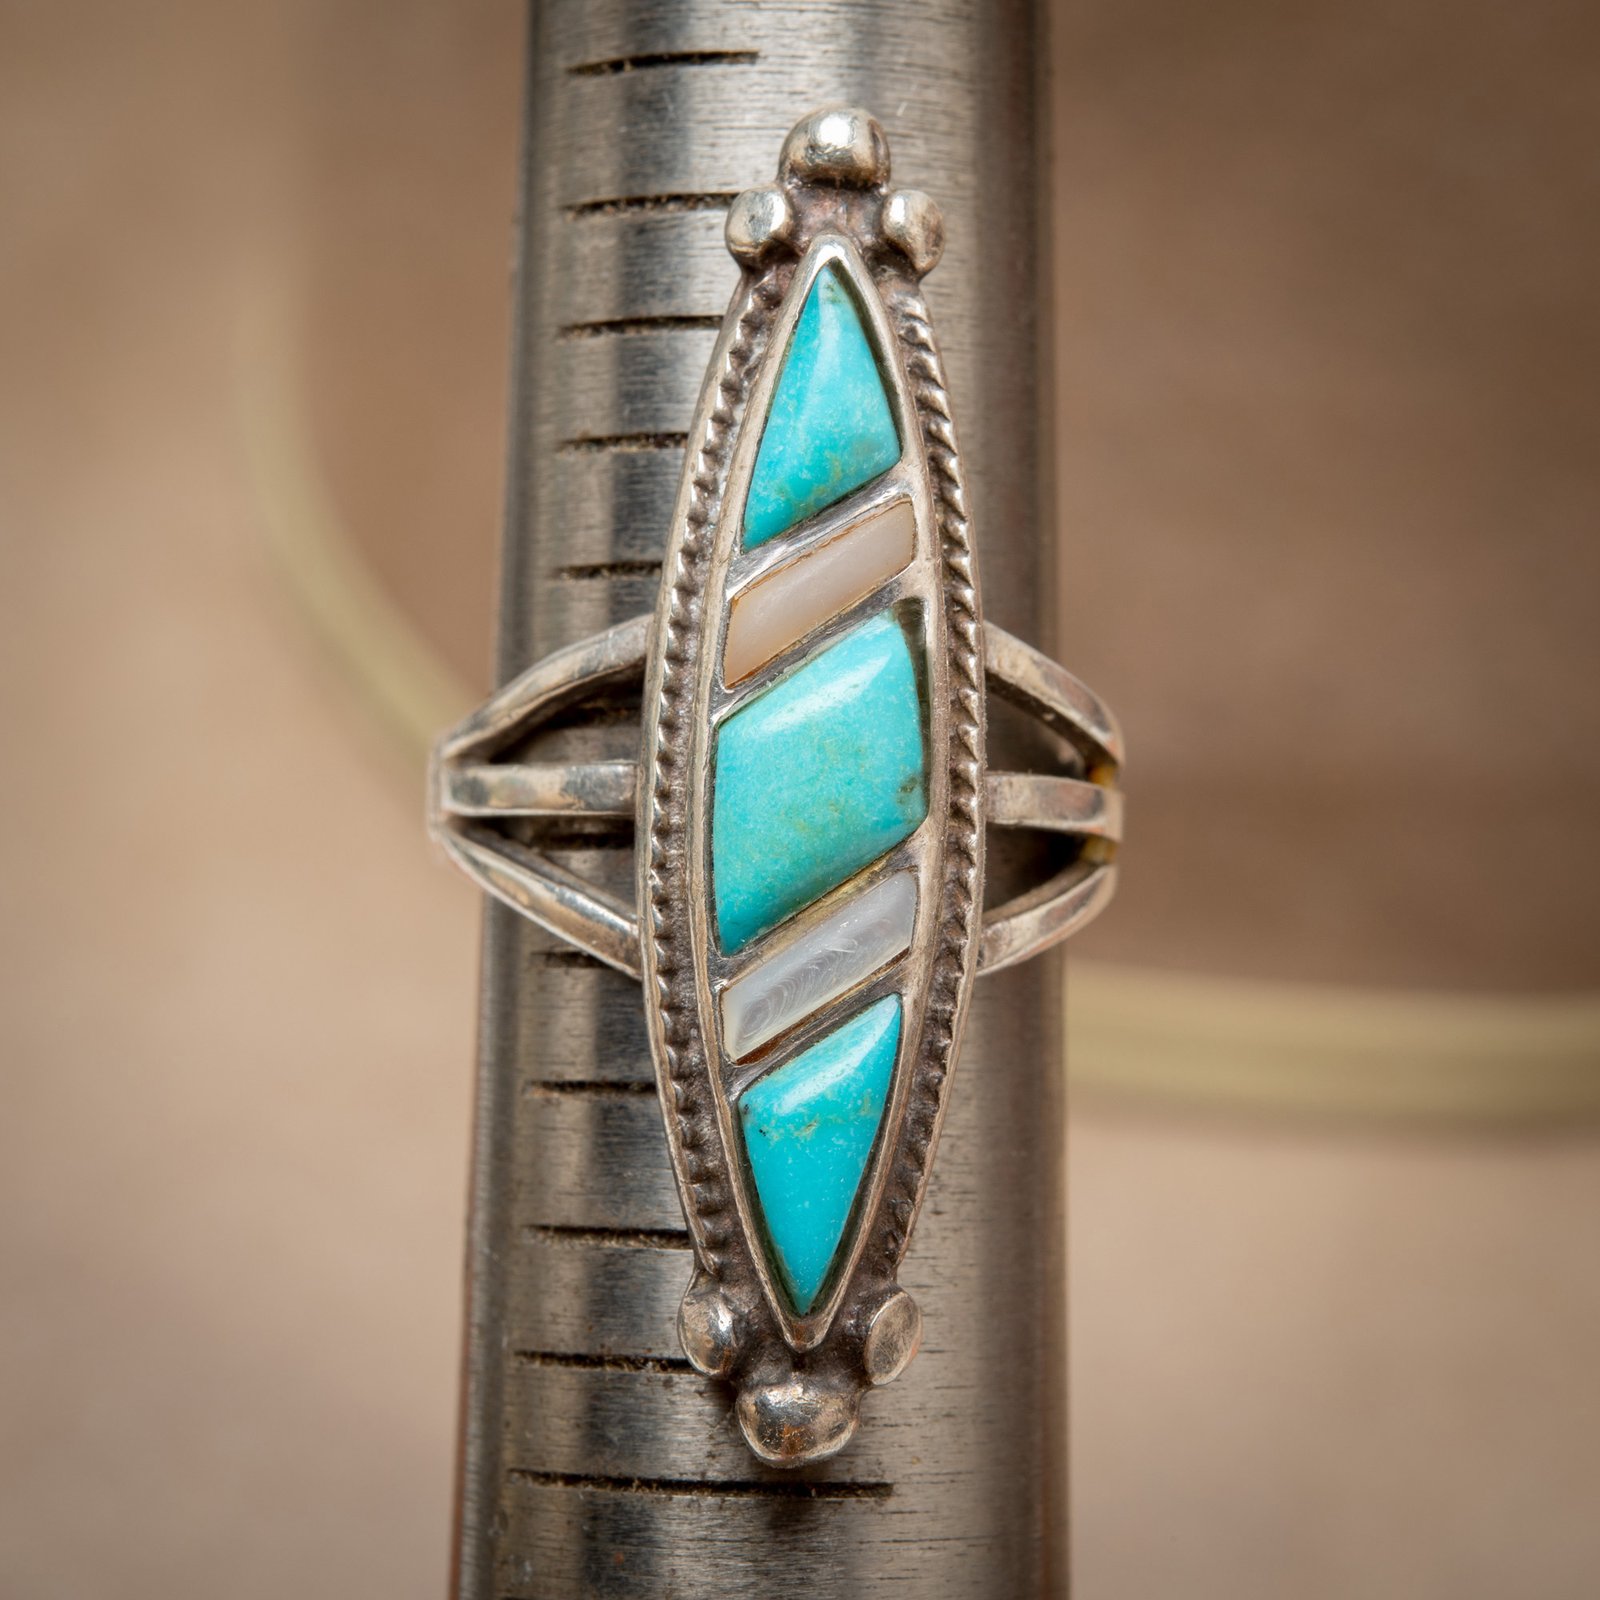 Zuni Sterling Silver Ring by Zuni Silversmith with Turquoise and 